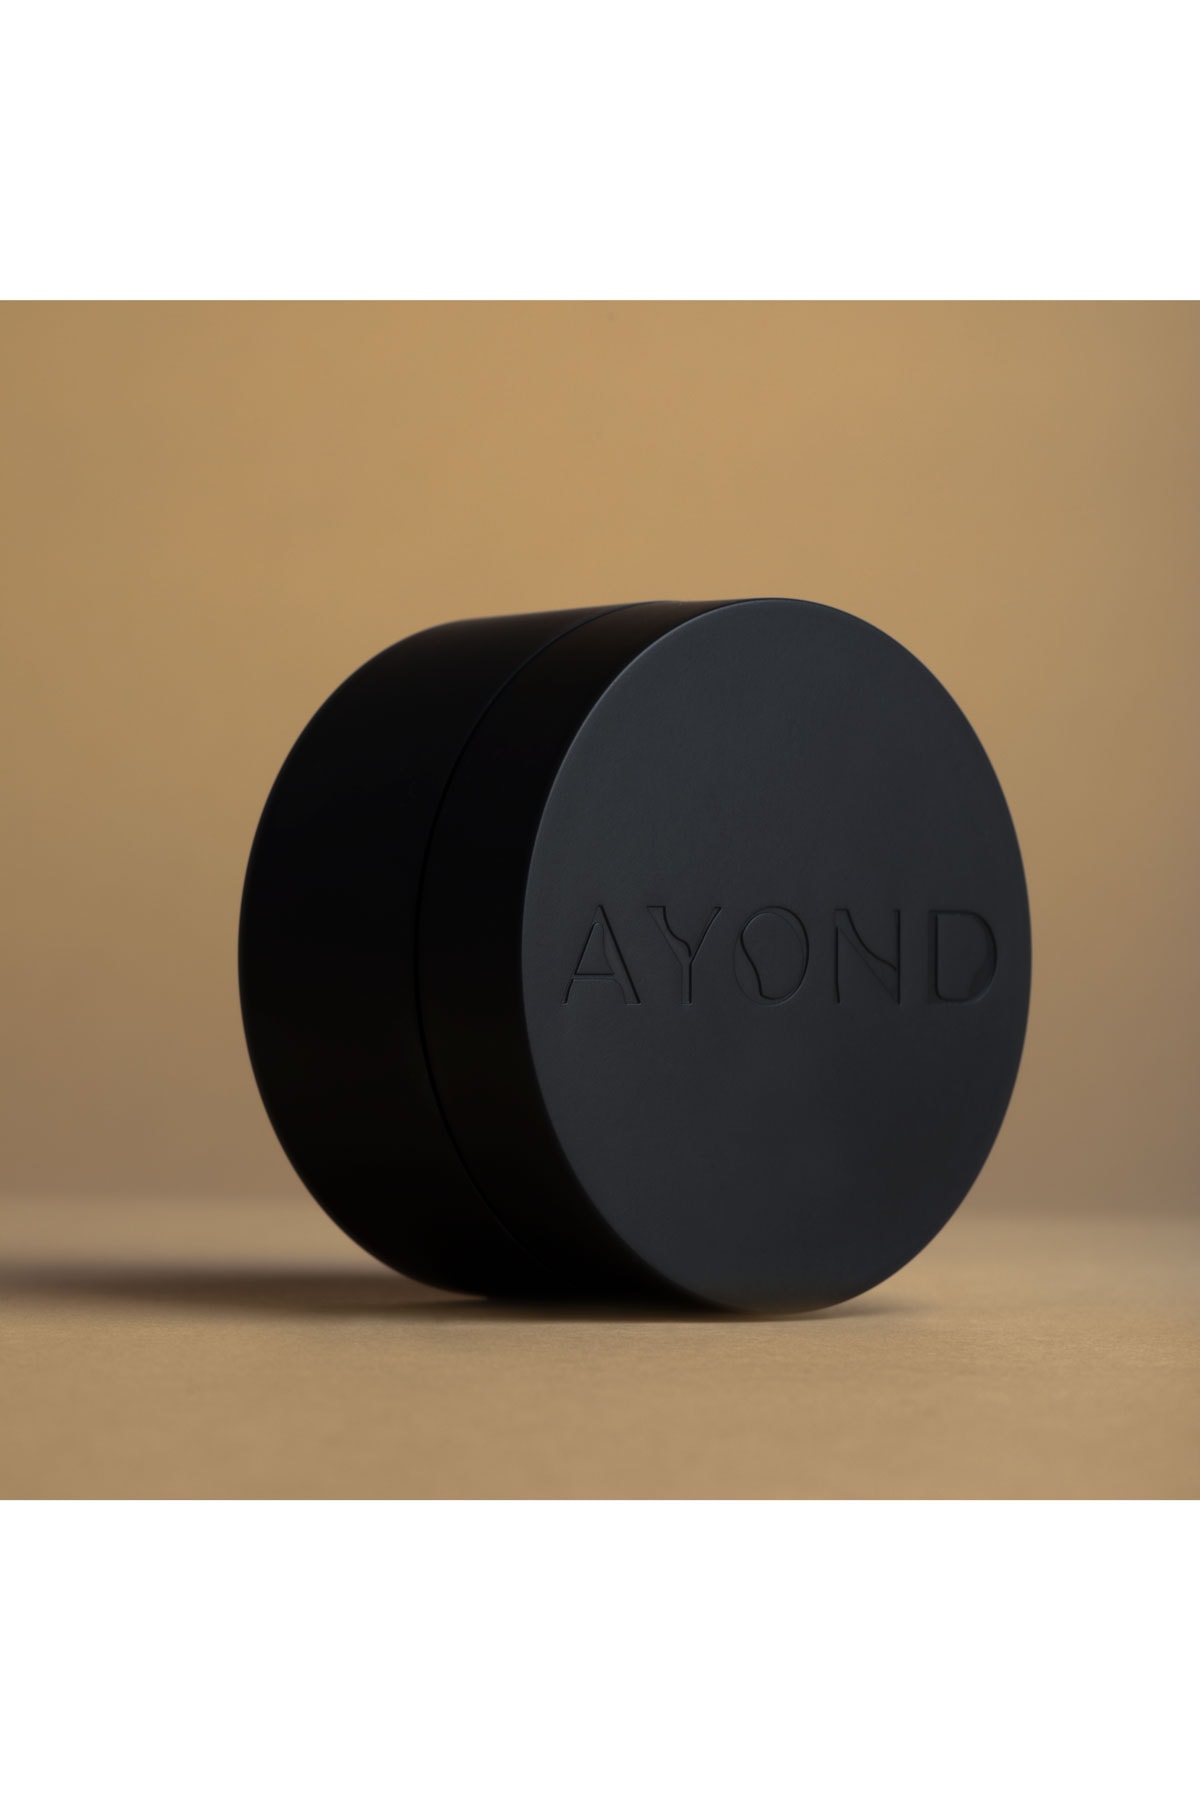 Ayond Skincare Gender Neutral Clean Black Owned Beauty Brand